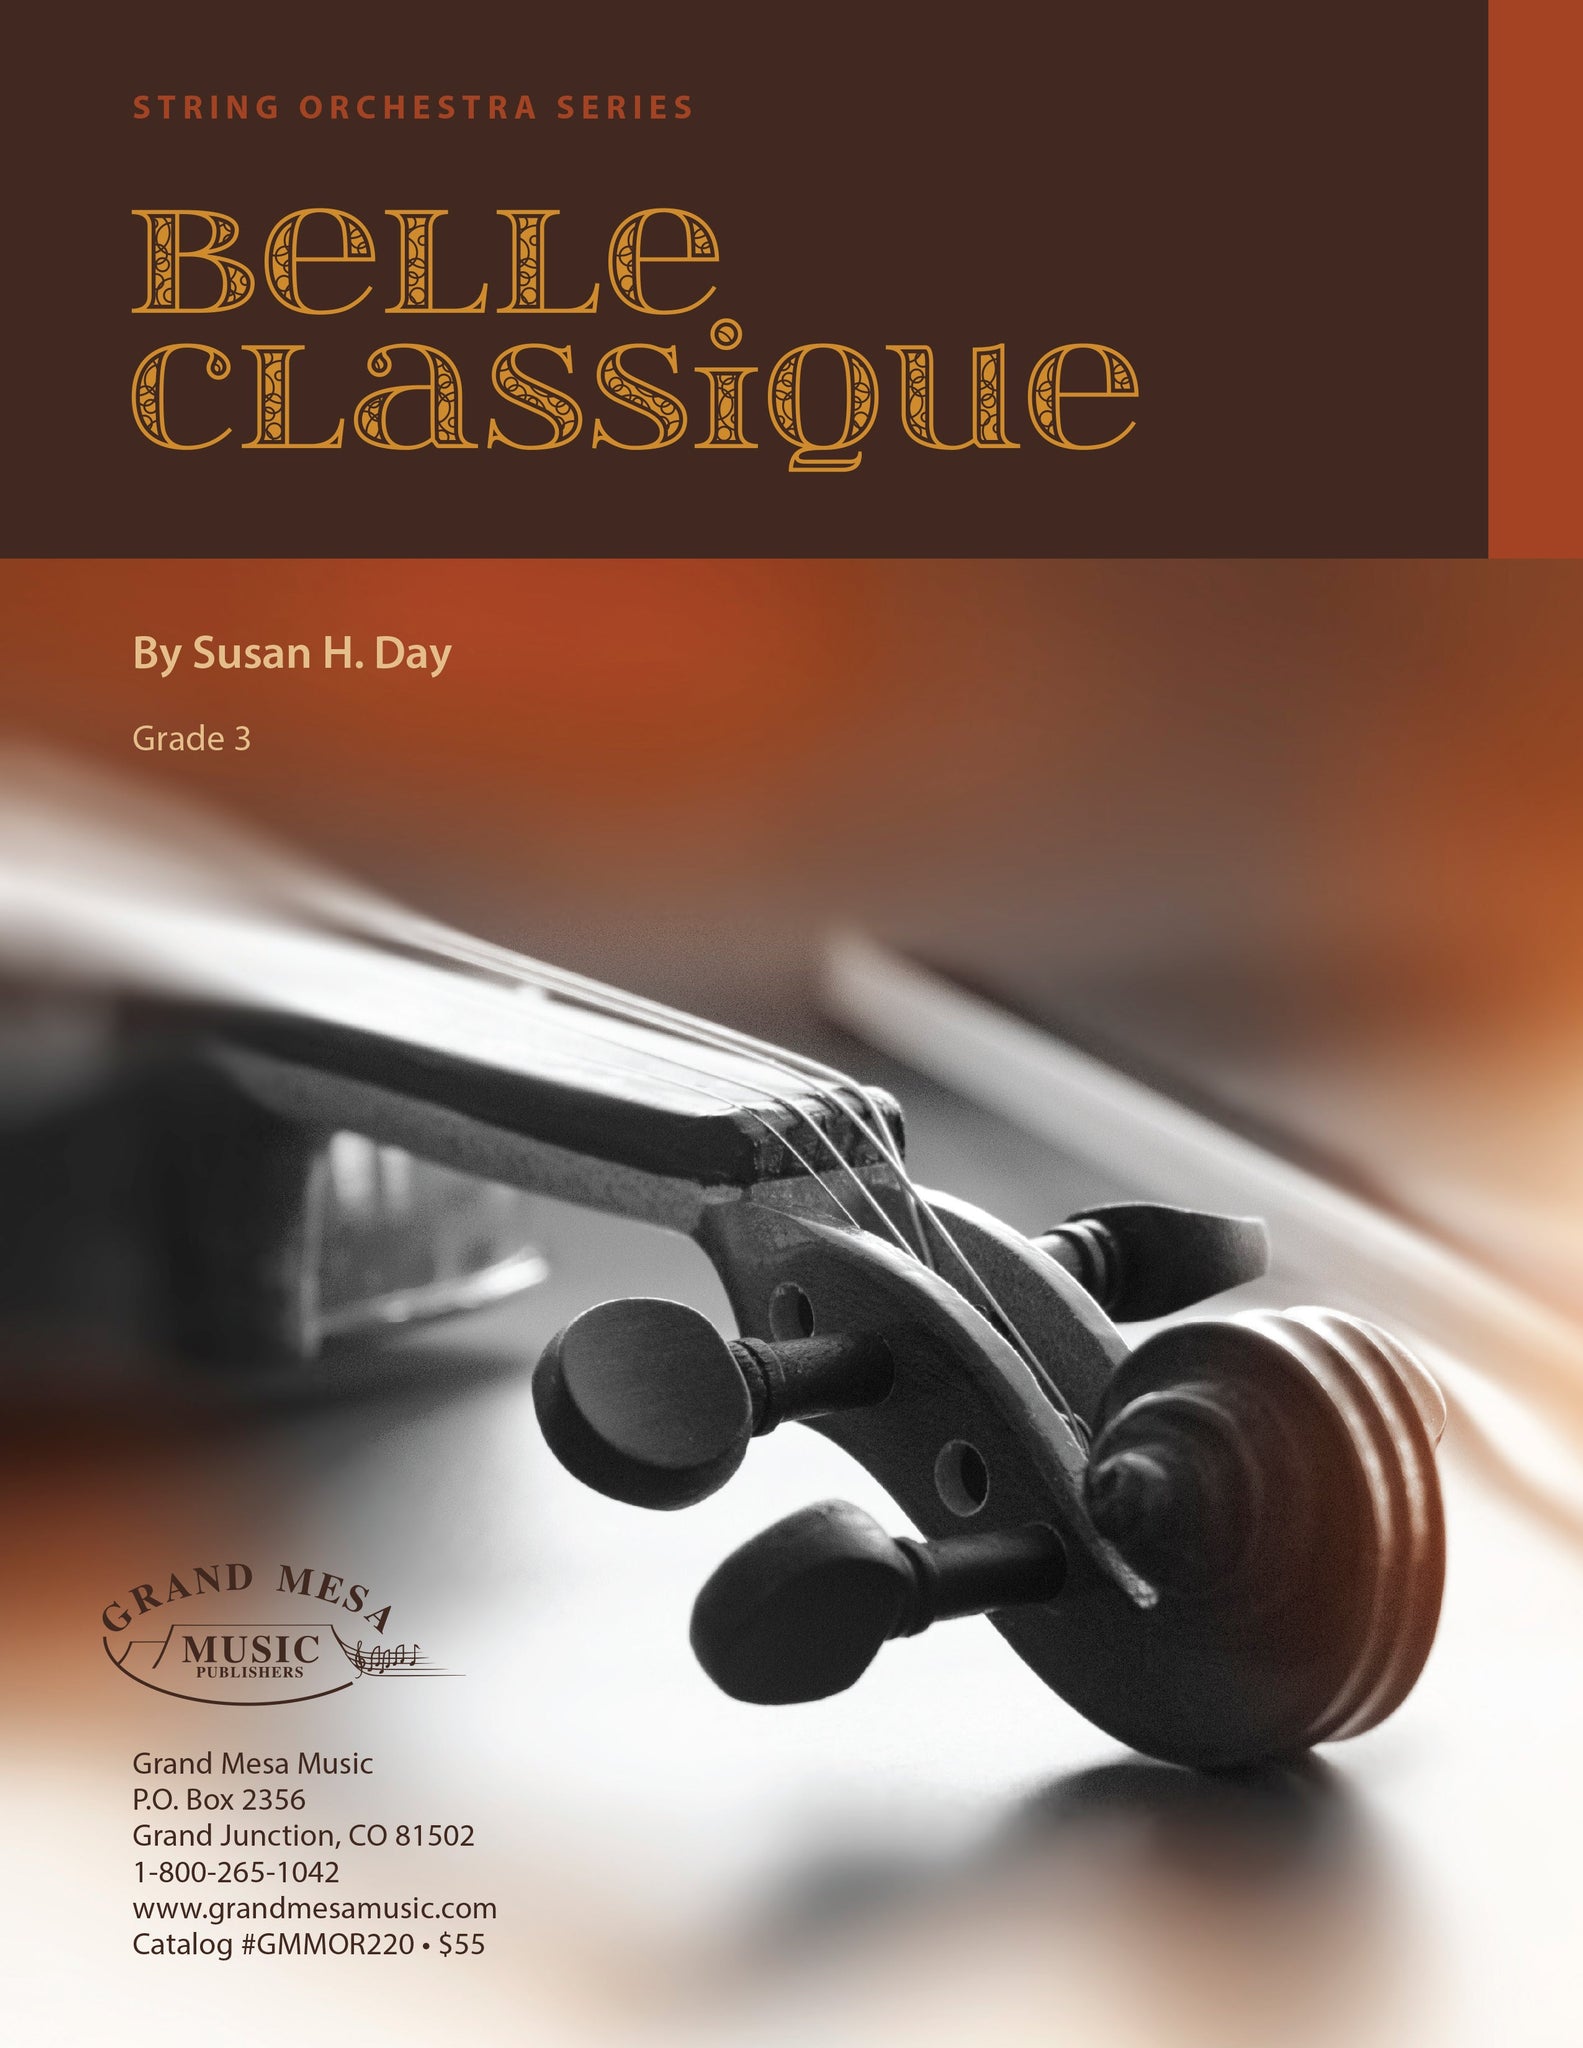 Strings sheet music cover of Belle Classique, composed by Susan Day.